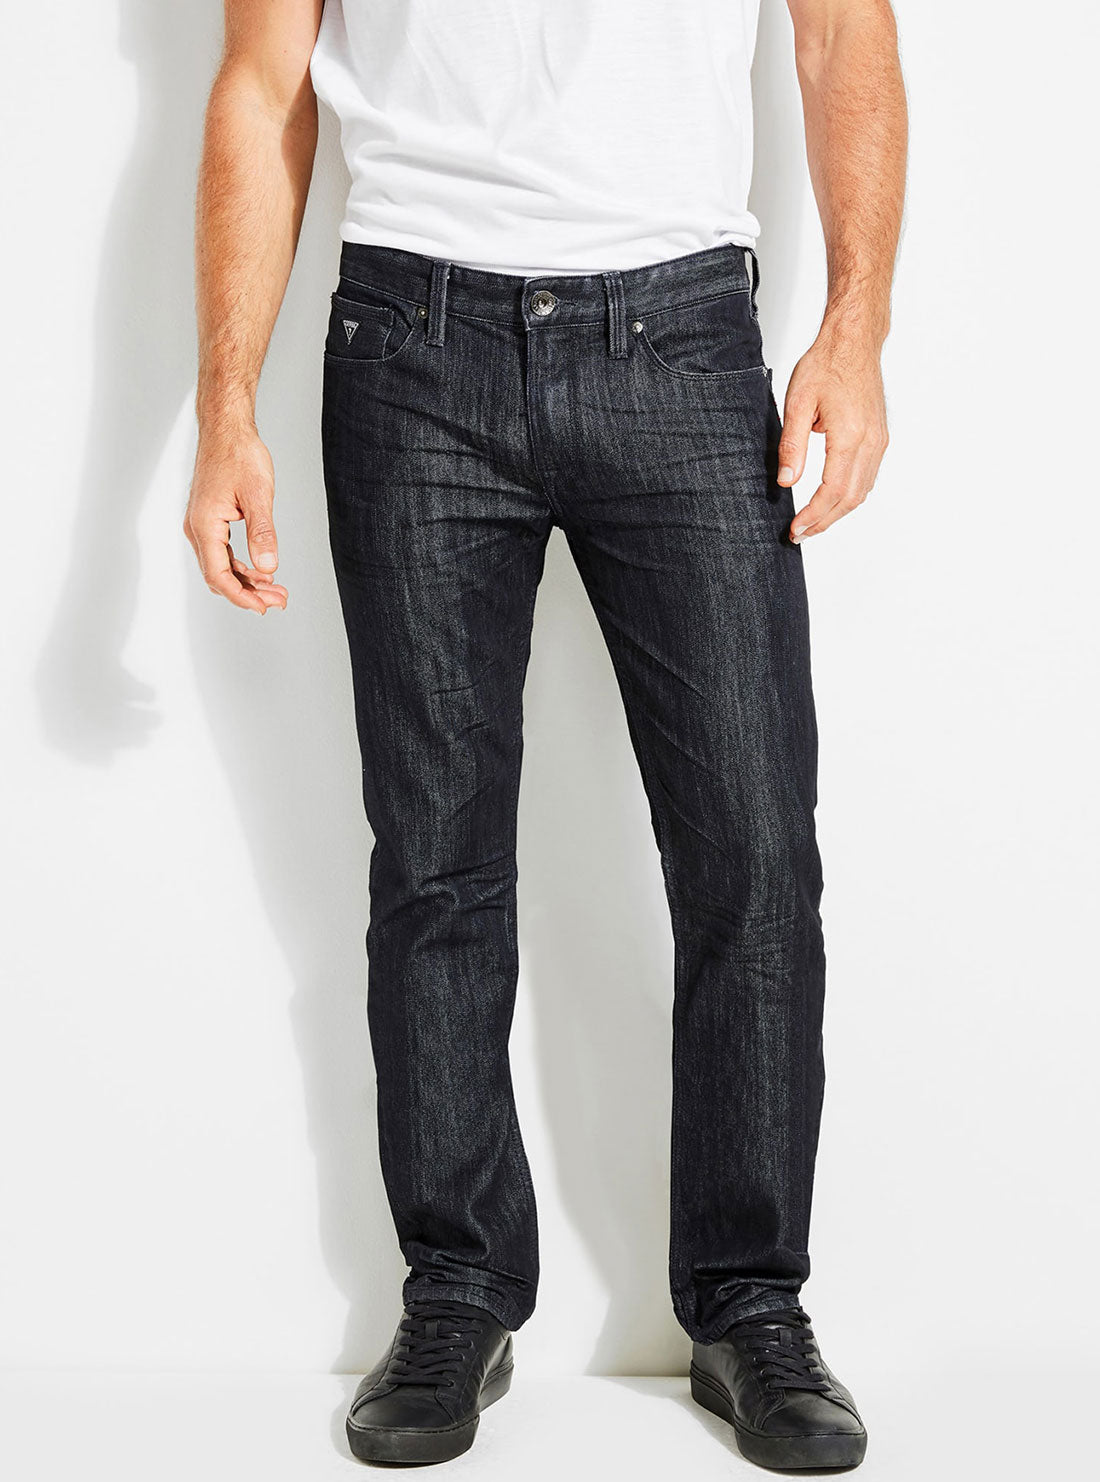 GUESS Mens Low-Rise Slim Straight Denim Jeans in Smokescreen Wash MB3AS121OD0 Full View